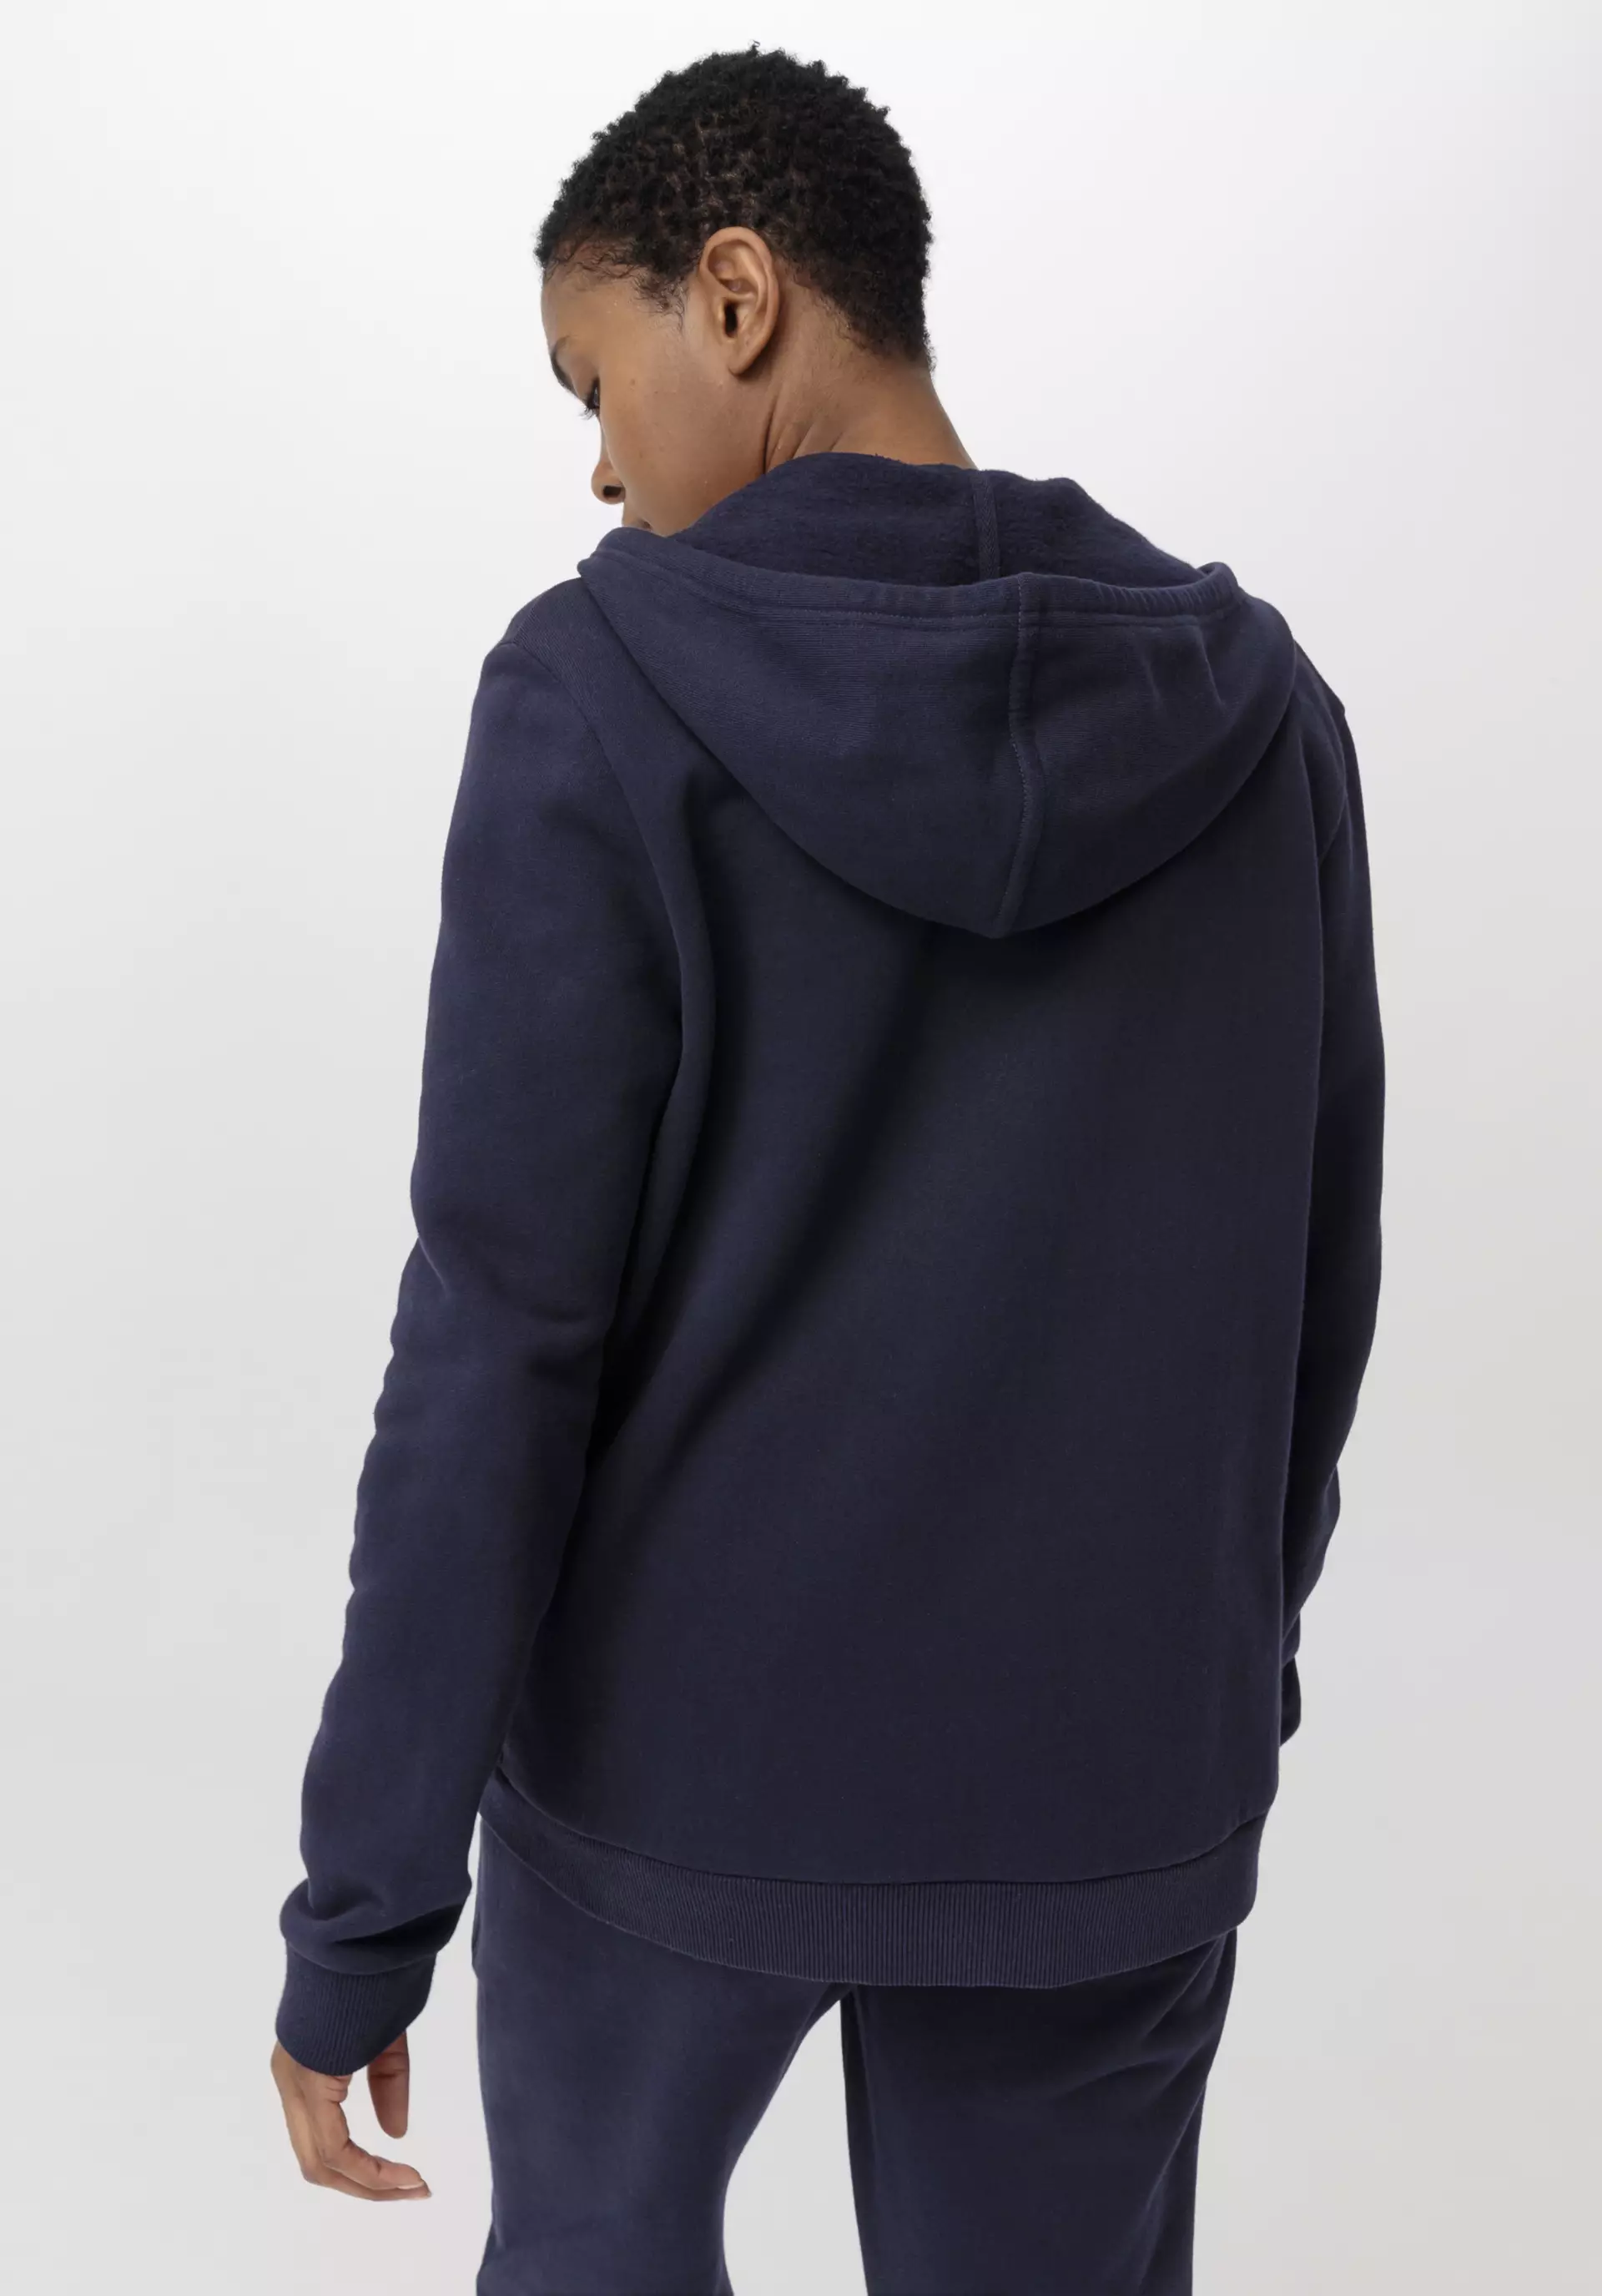 Sweat jacket made from pure organic cotton - 3